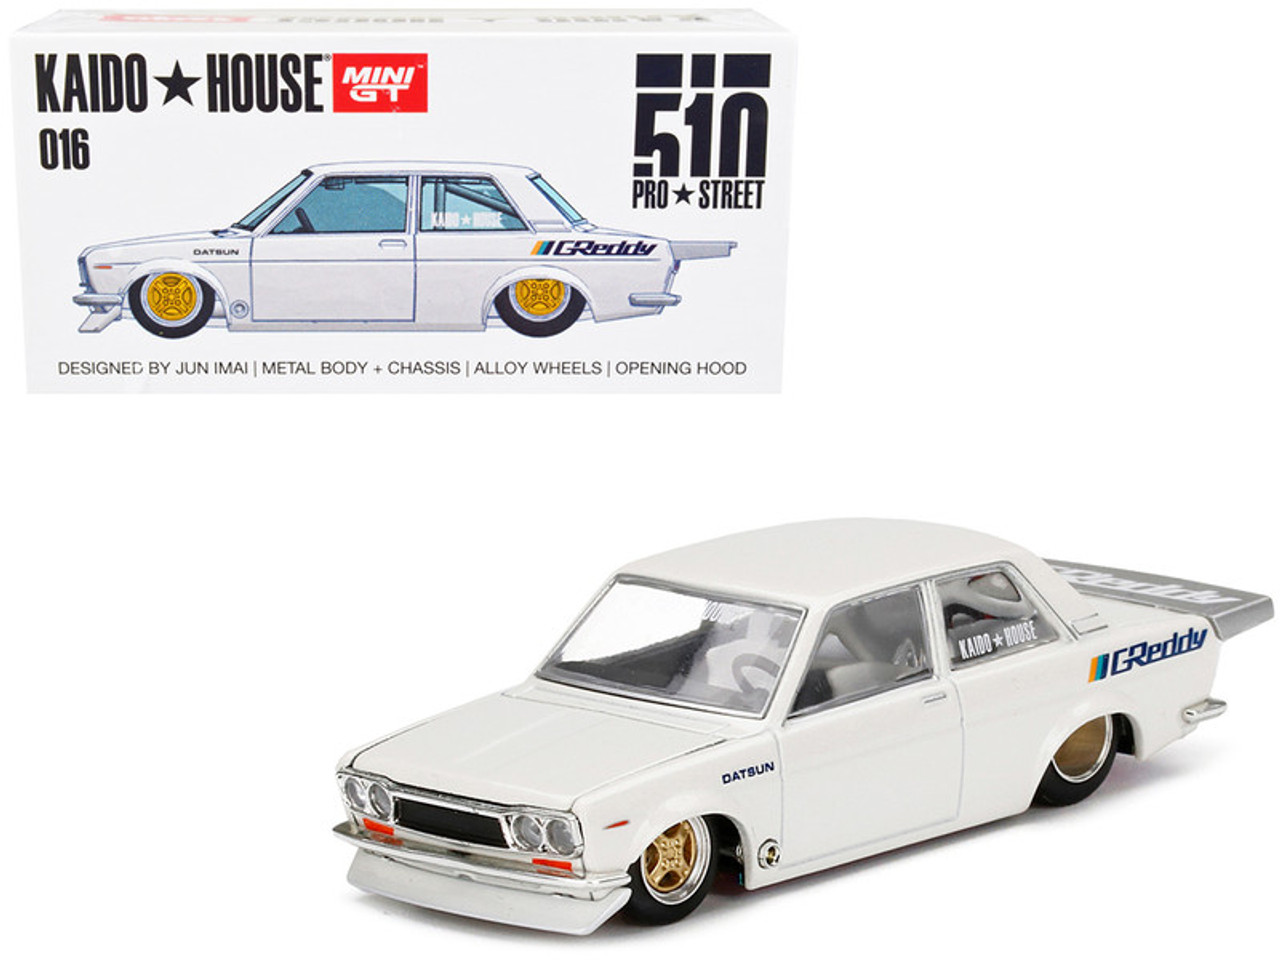 Datsun 510 Pro Street Pearl White "GREDDY" (Designed by Jun Imai) "Kaido House" Special 1/64 Diecast Model Car by True Scale Miniatures